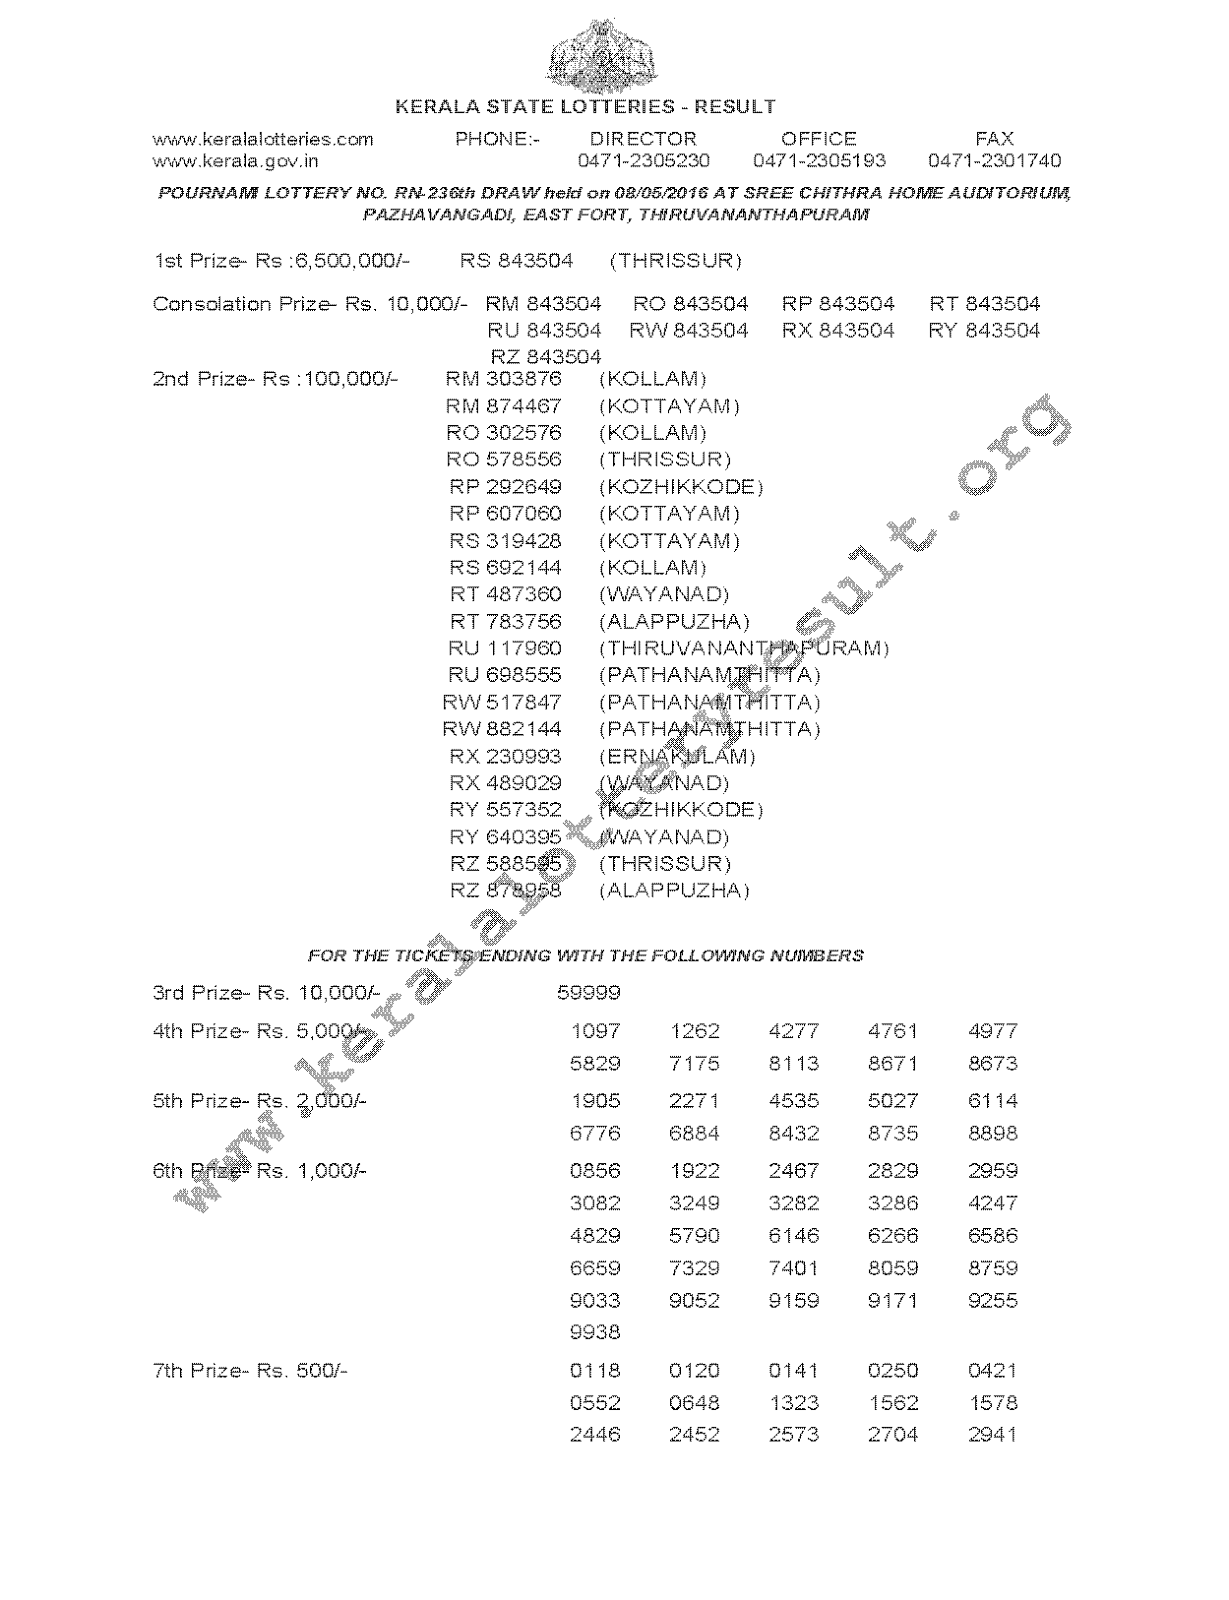 POURNAMI Lottery RN 236 Result 8-5-2016